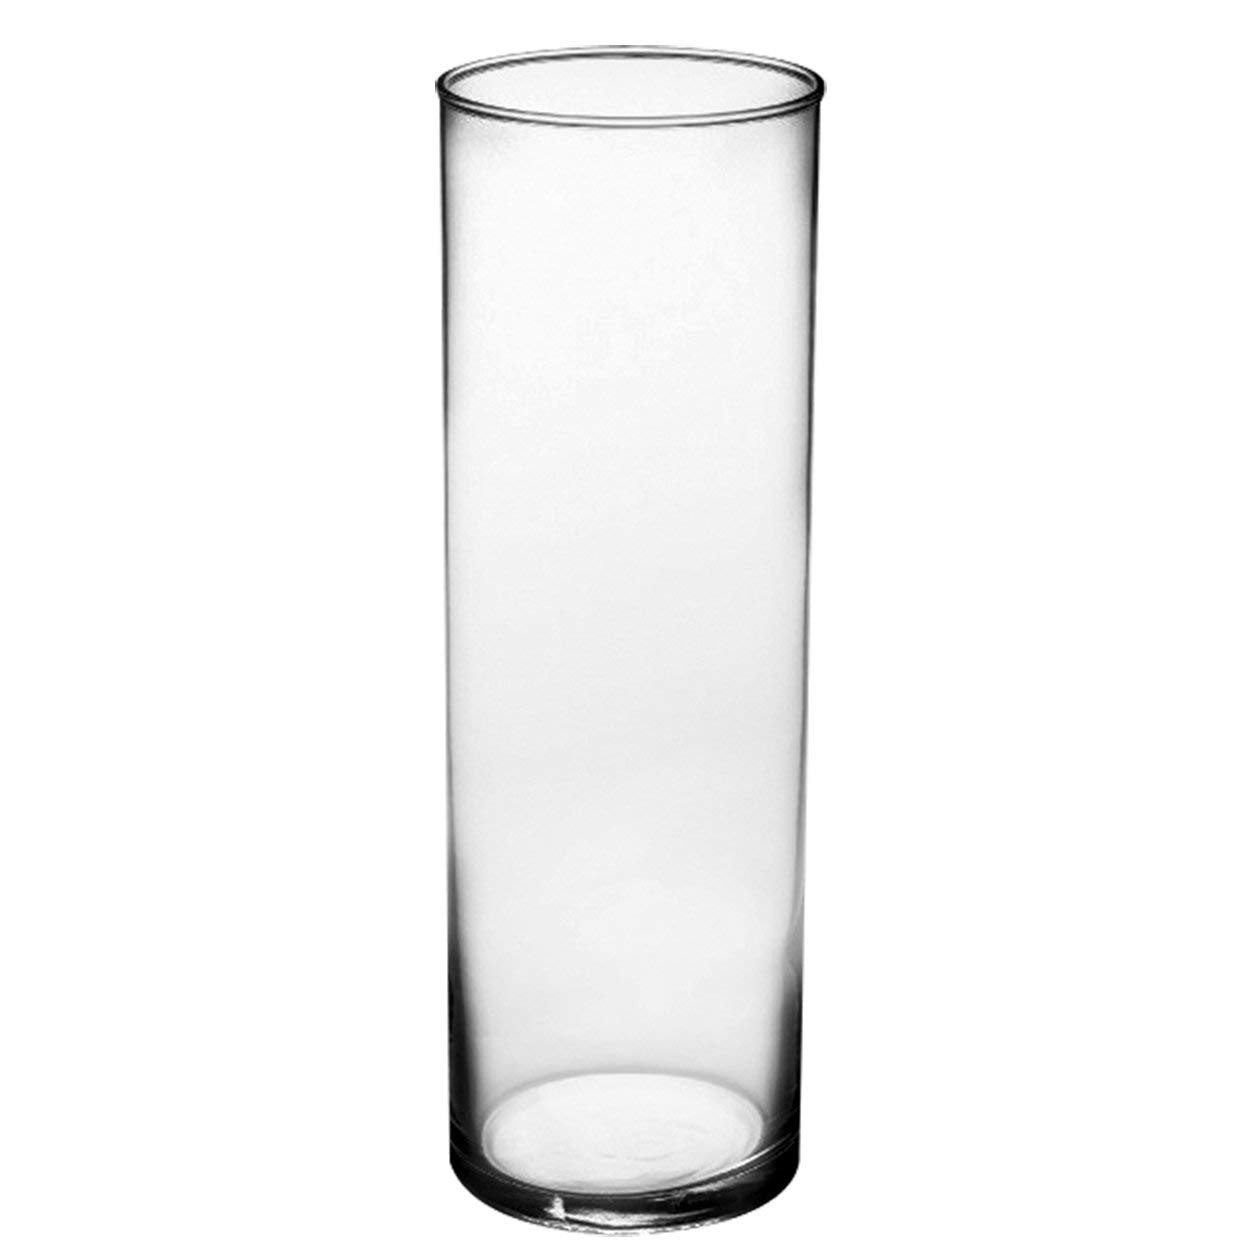 30 Best 24 Inch Clear Glass Vases 2024 free download 24 inch clear glass vases of amazon com syndicate sales 3 1 2 x 10 1 2 cylinder vase clear within amazon com syndicate sales 3 1 2 x 10 1 2 cylinder vase clear planters garden outdoor